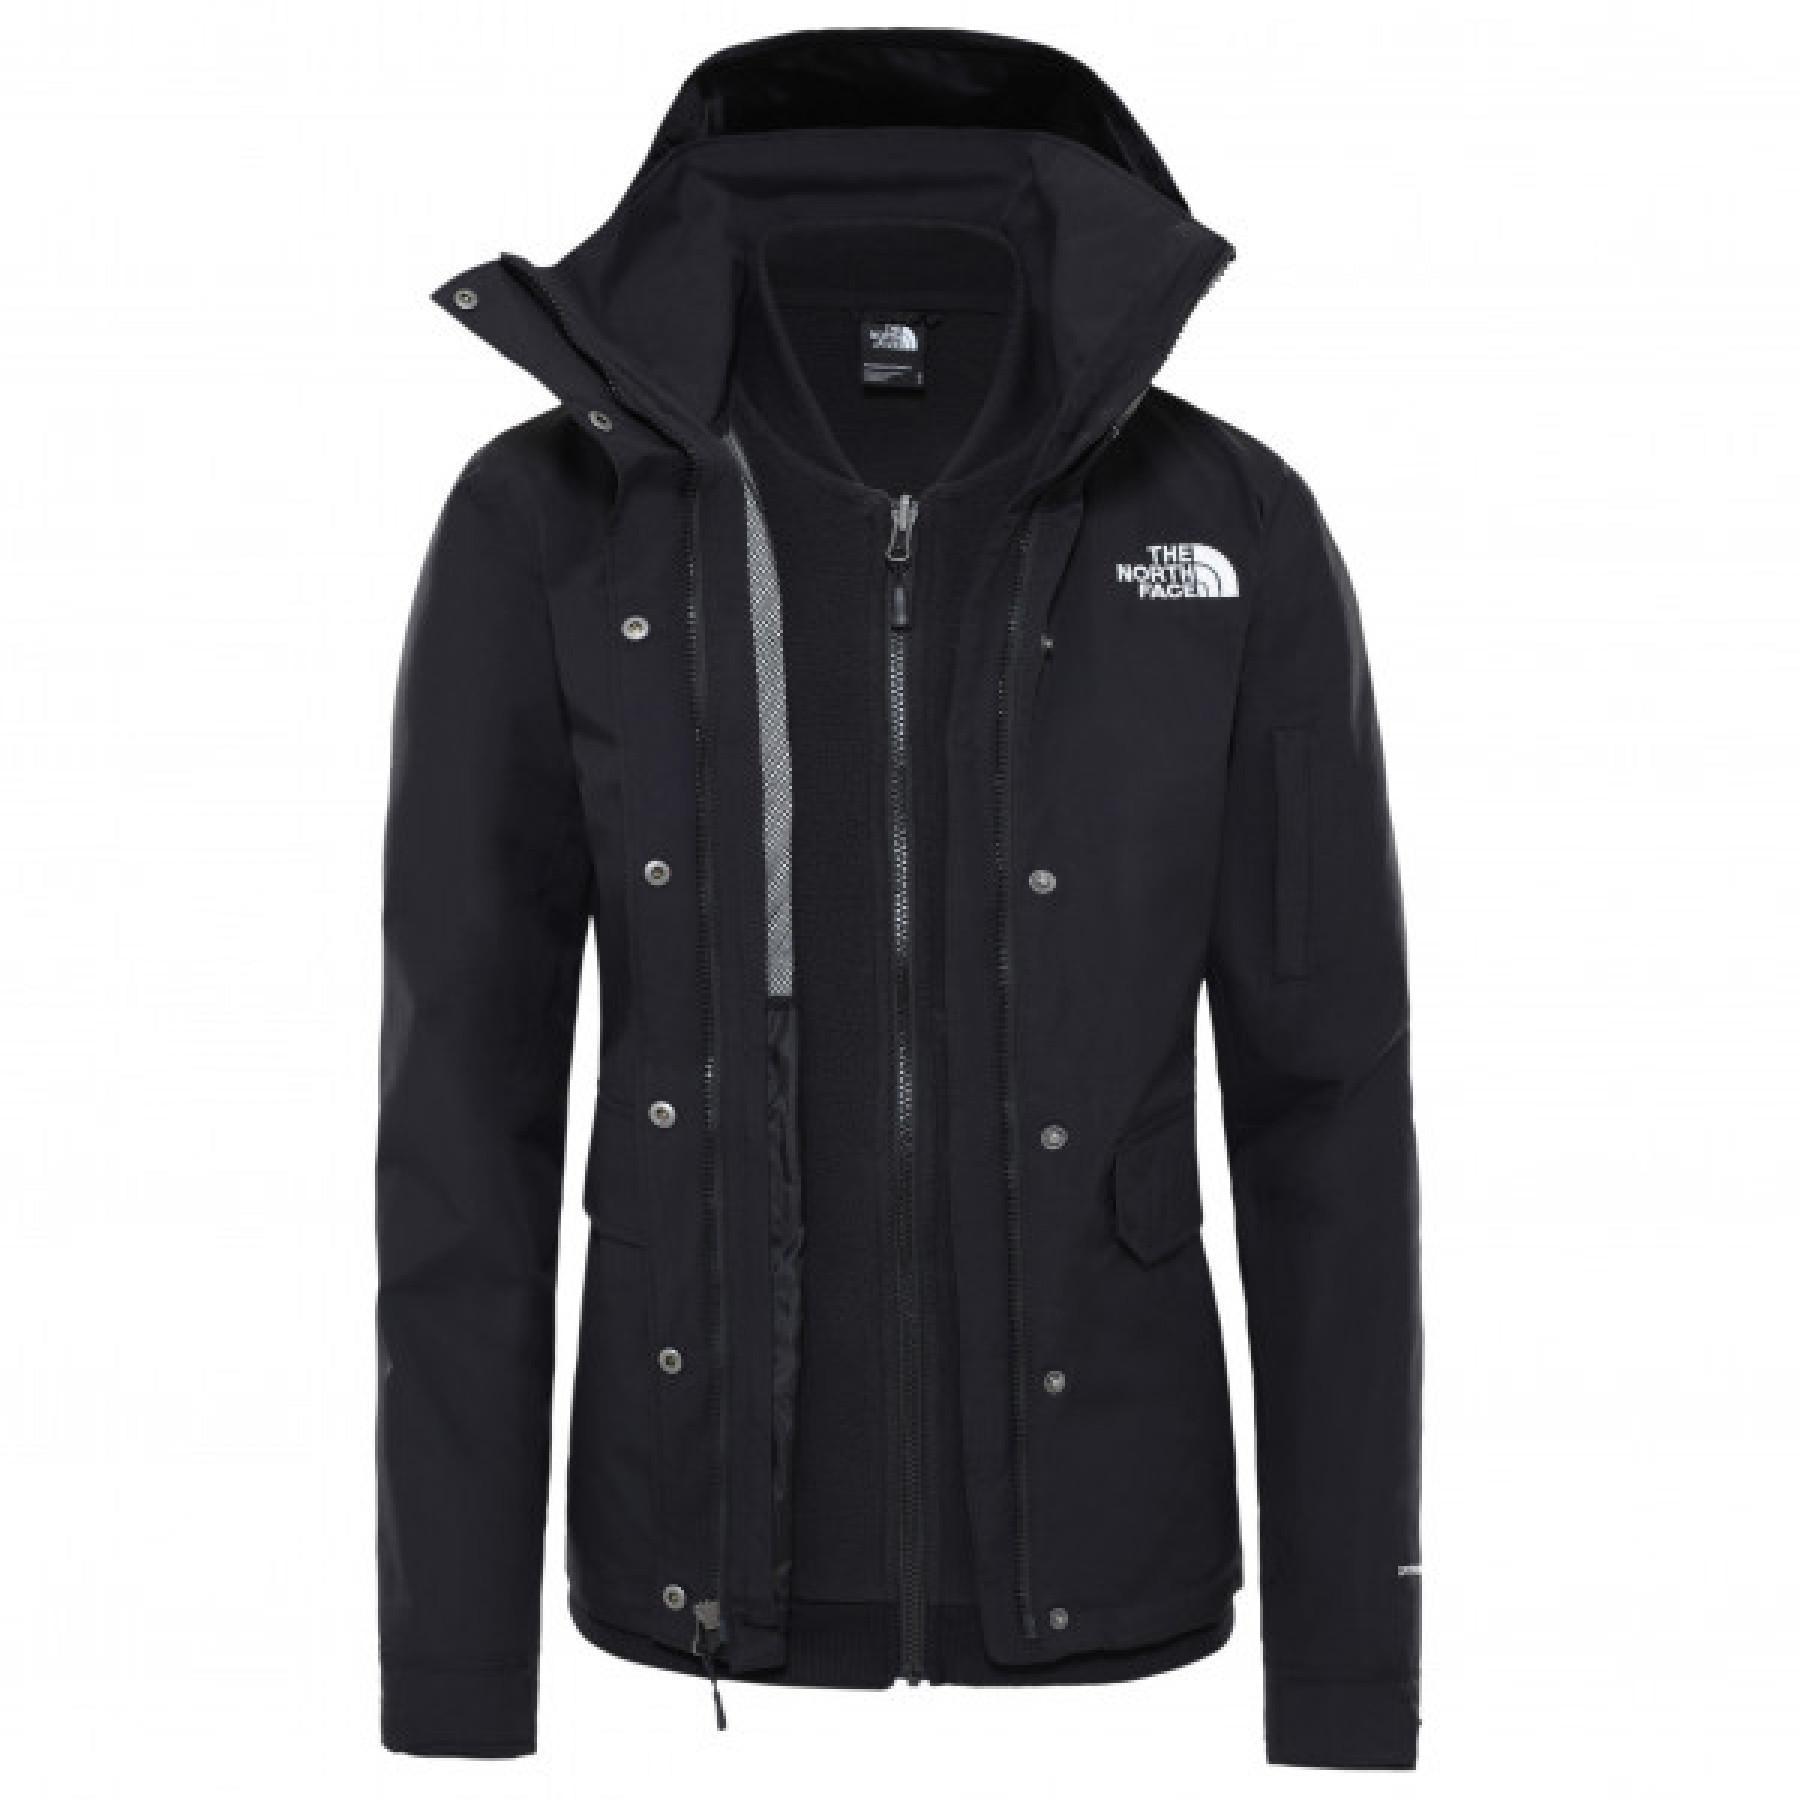 Chaqueta mujer The North Face Pinecroft Triclimate